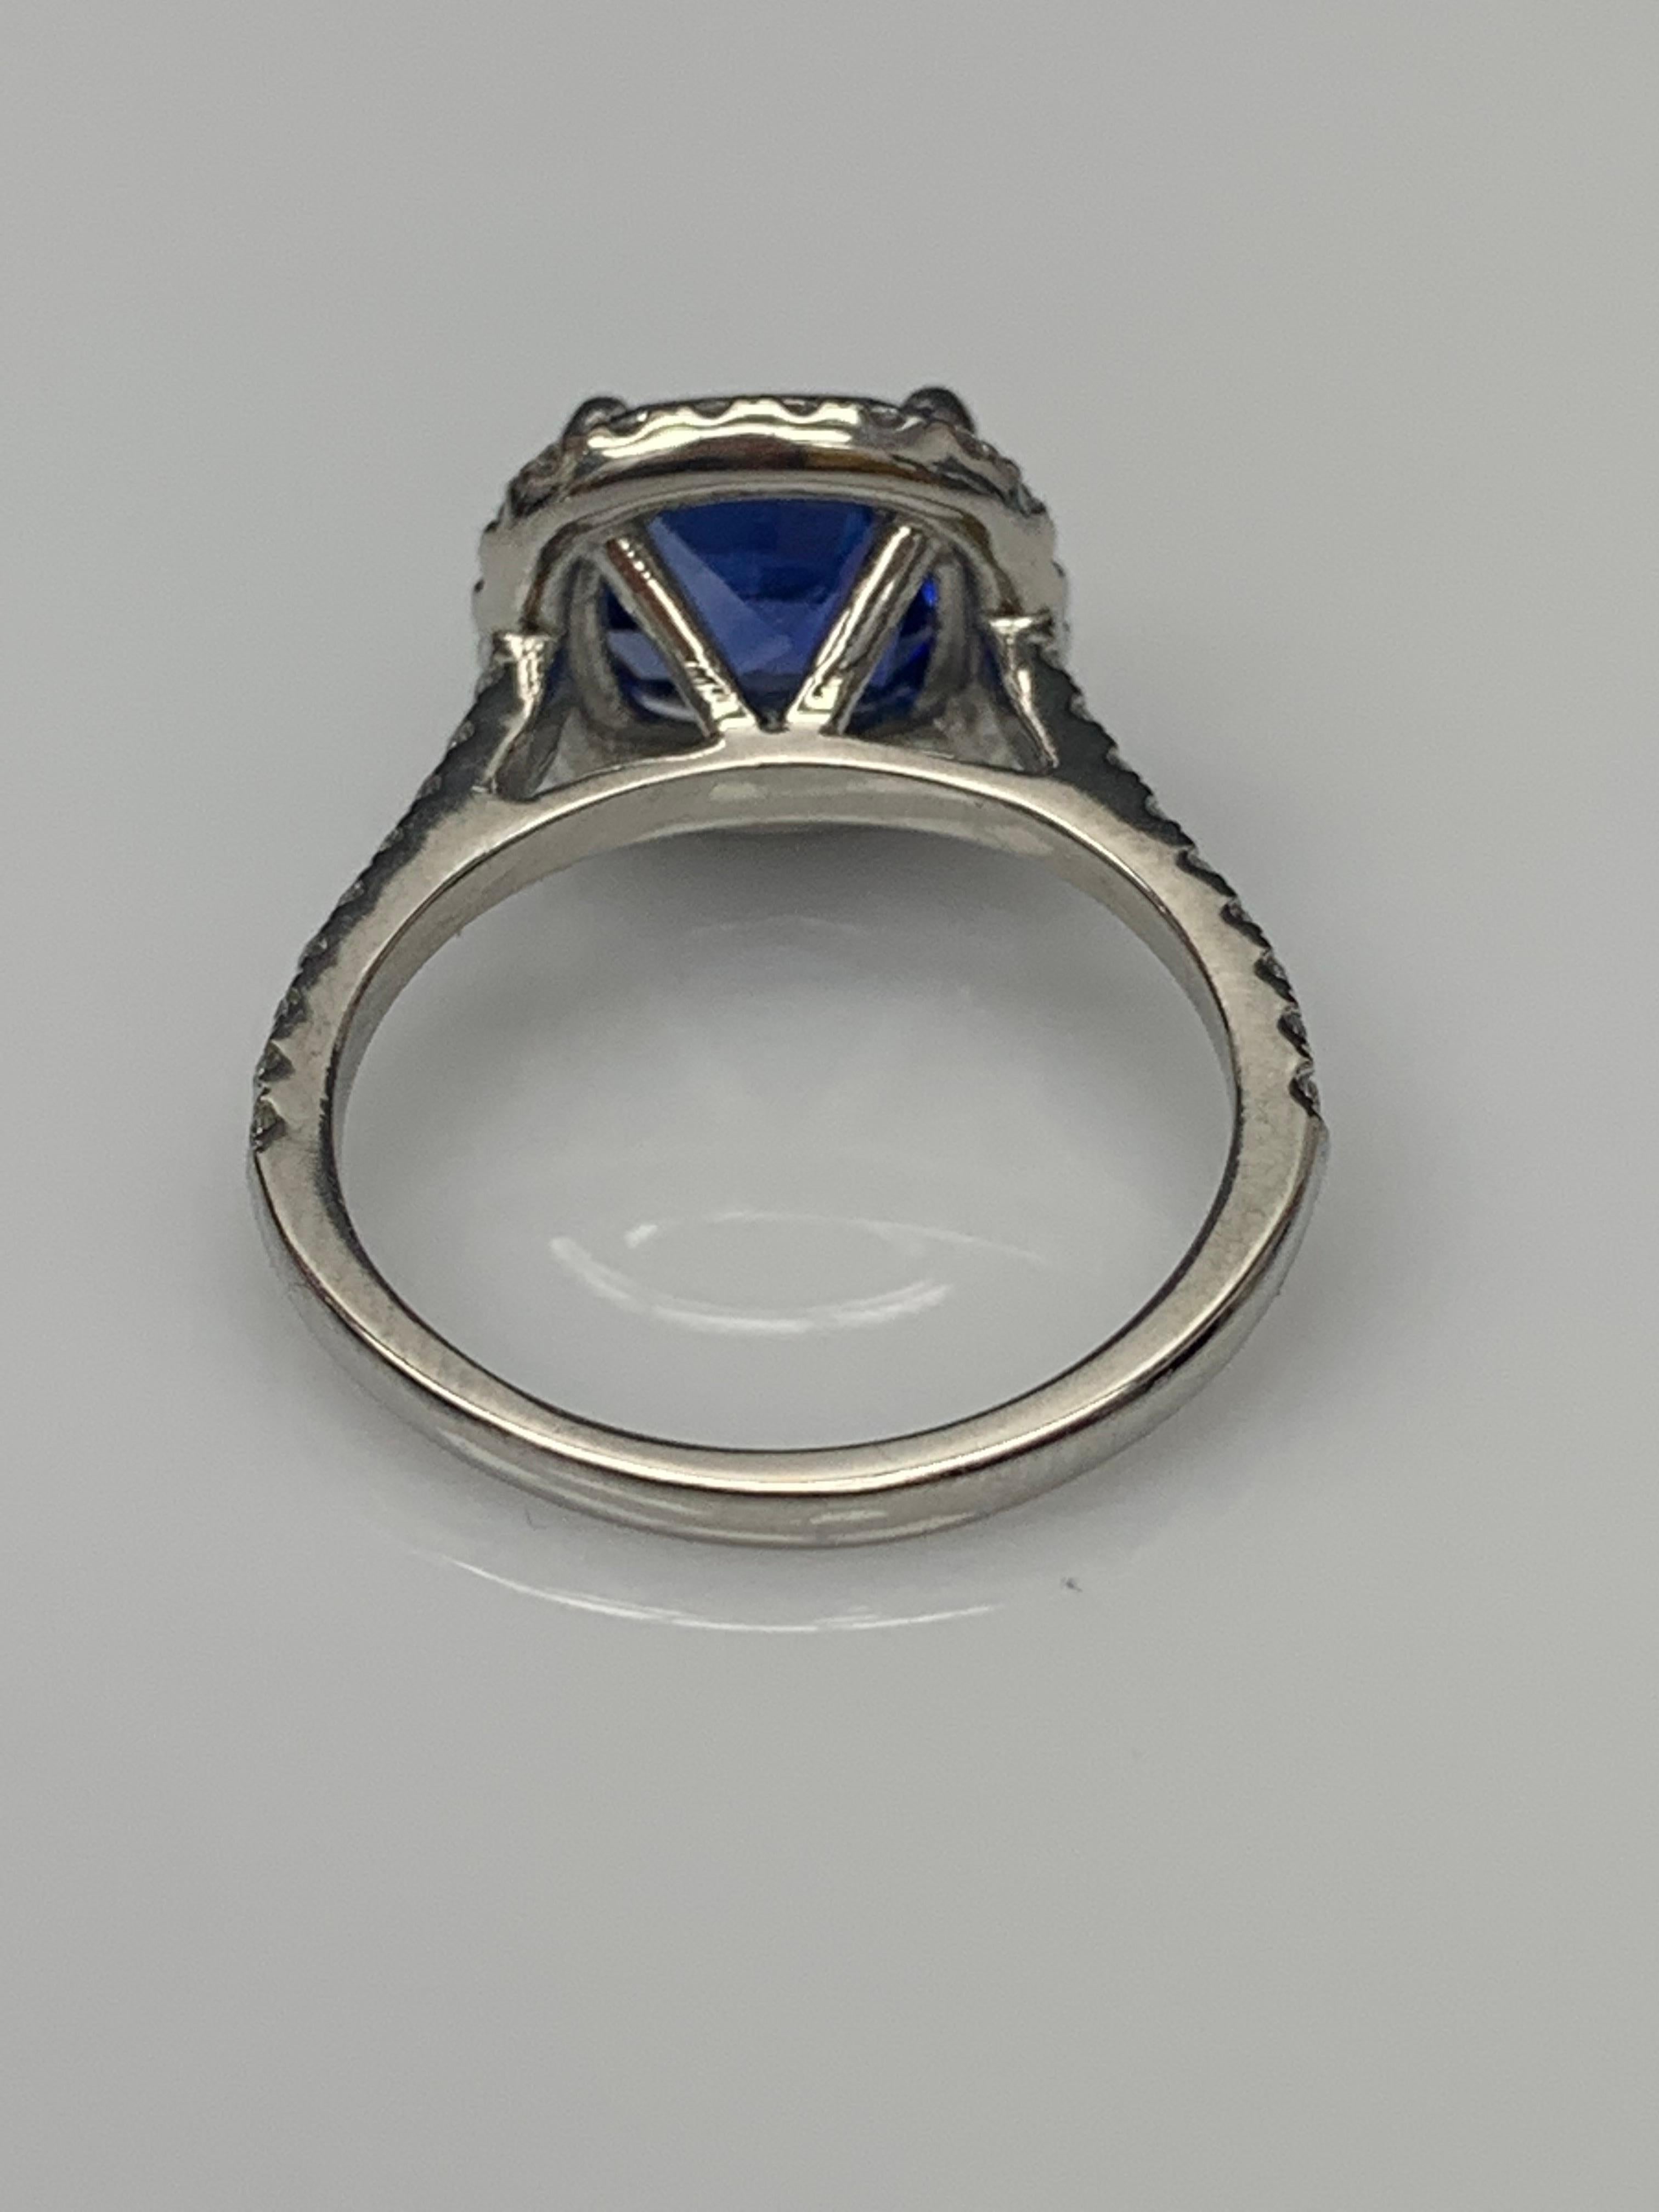 3.07 Carat Cushion Cut Sapphire and Diamond Halo Ring in Platinum For Sale 12